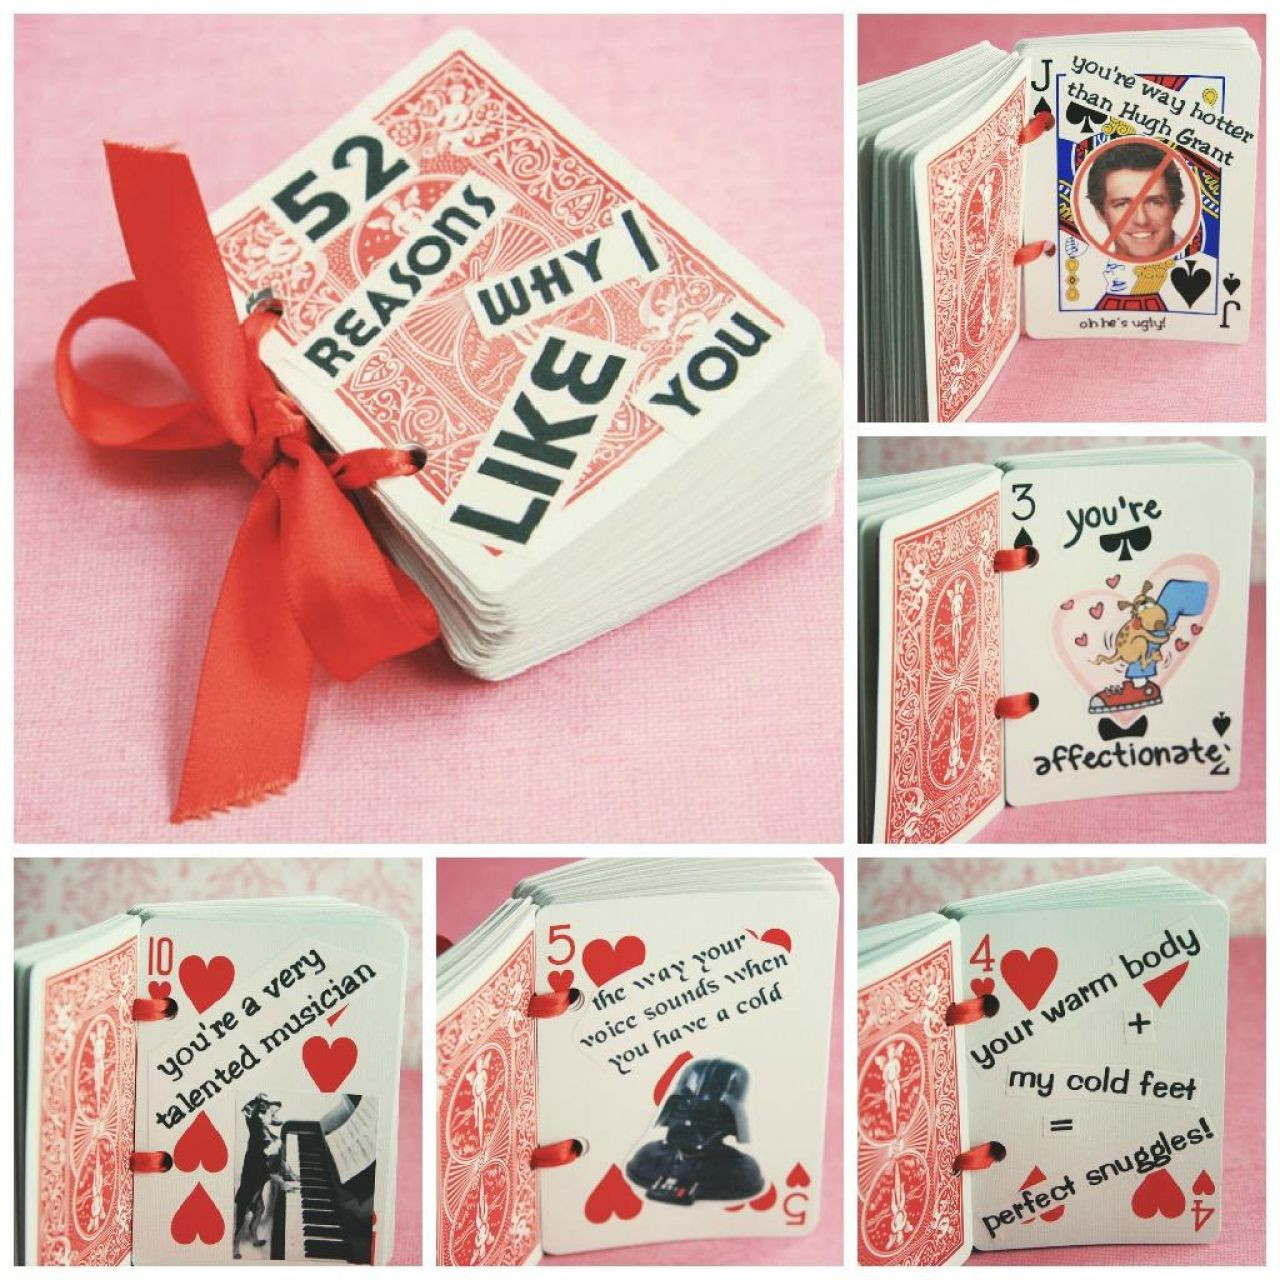 Valentines Day Gifts For Him Homemade
 17 Last Minute Handmade Valentine Gifts for Him